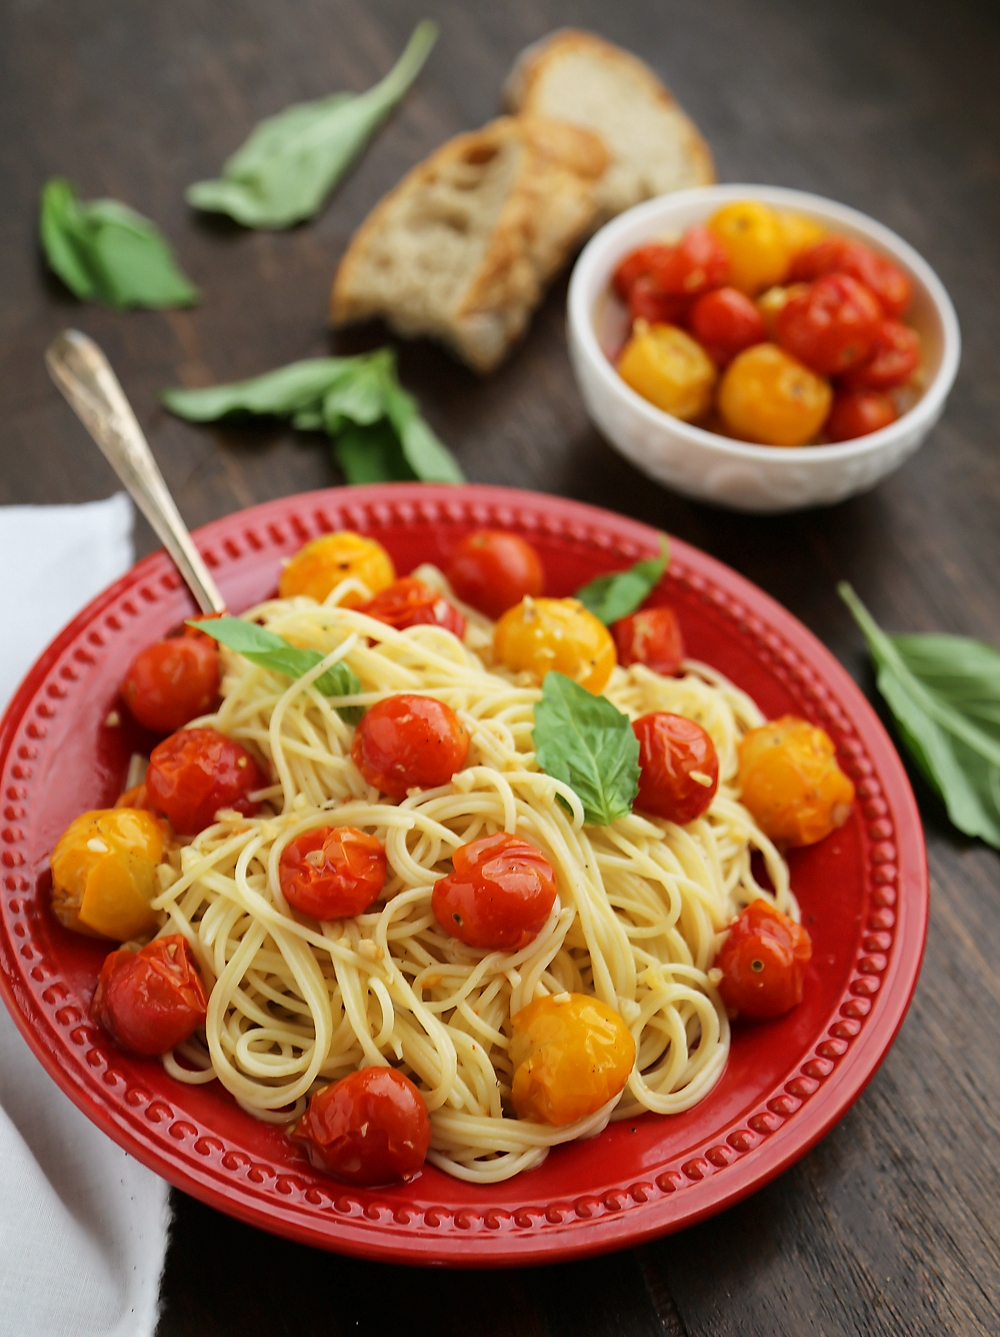 Garlic Roasted Cherry Tomatoes - Stir into pasta or rice, serve on crostini, mix into a frittata, use as a pizza topping, spread on sandwiches, purée into a sauce, or keep them canned up to 2 weeks. Endless possibilities for one perfect-every-time recipe! Thecomfortofcooking.com